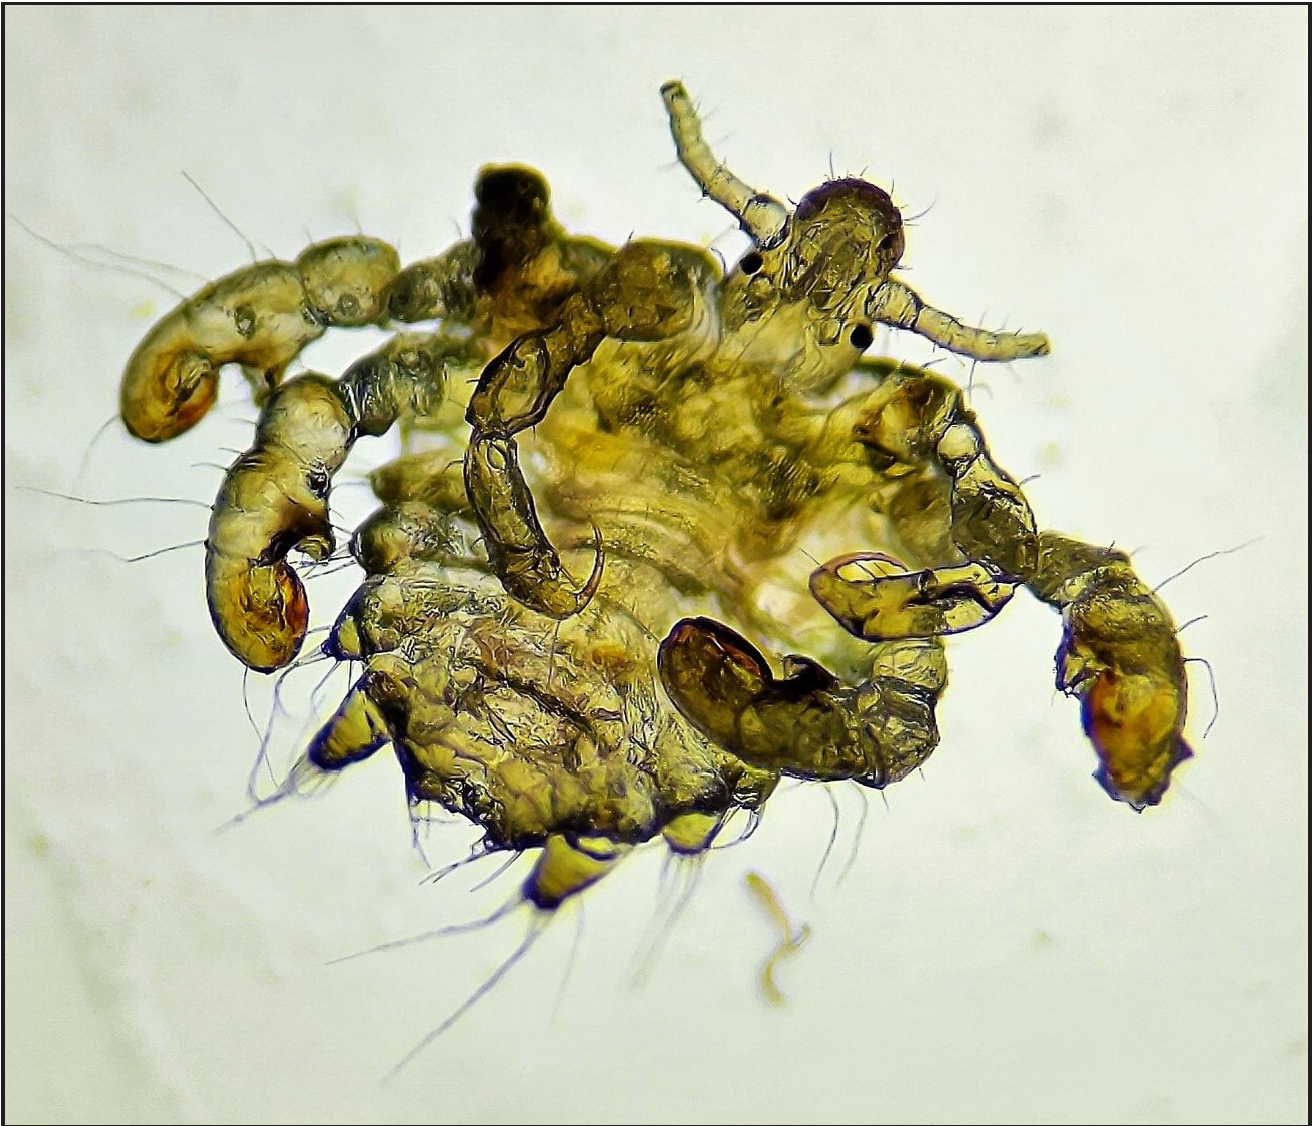 Microscopy (10×) showing Pthirus pubis (crab louse) with characteristic morphological features.